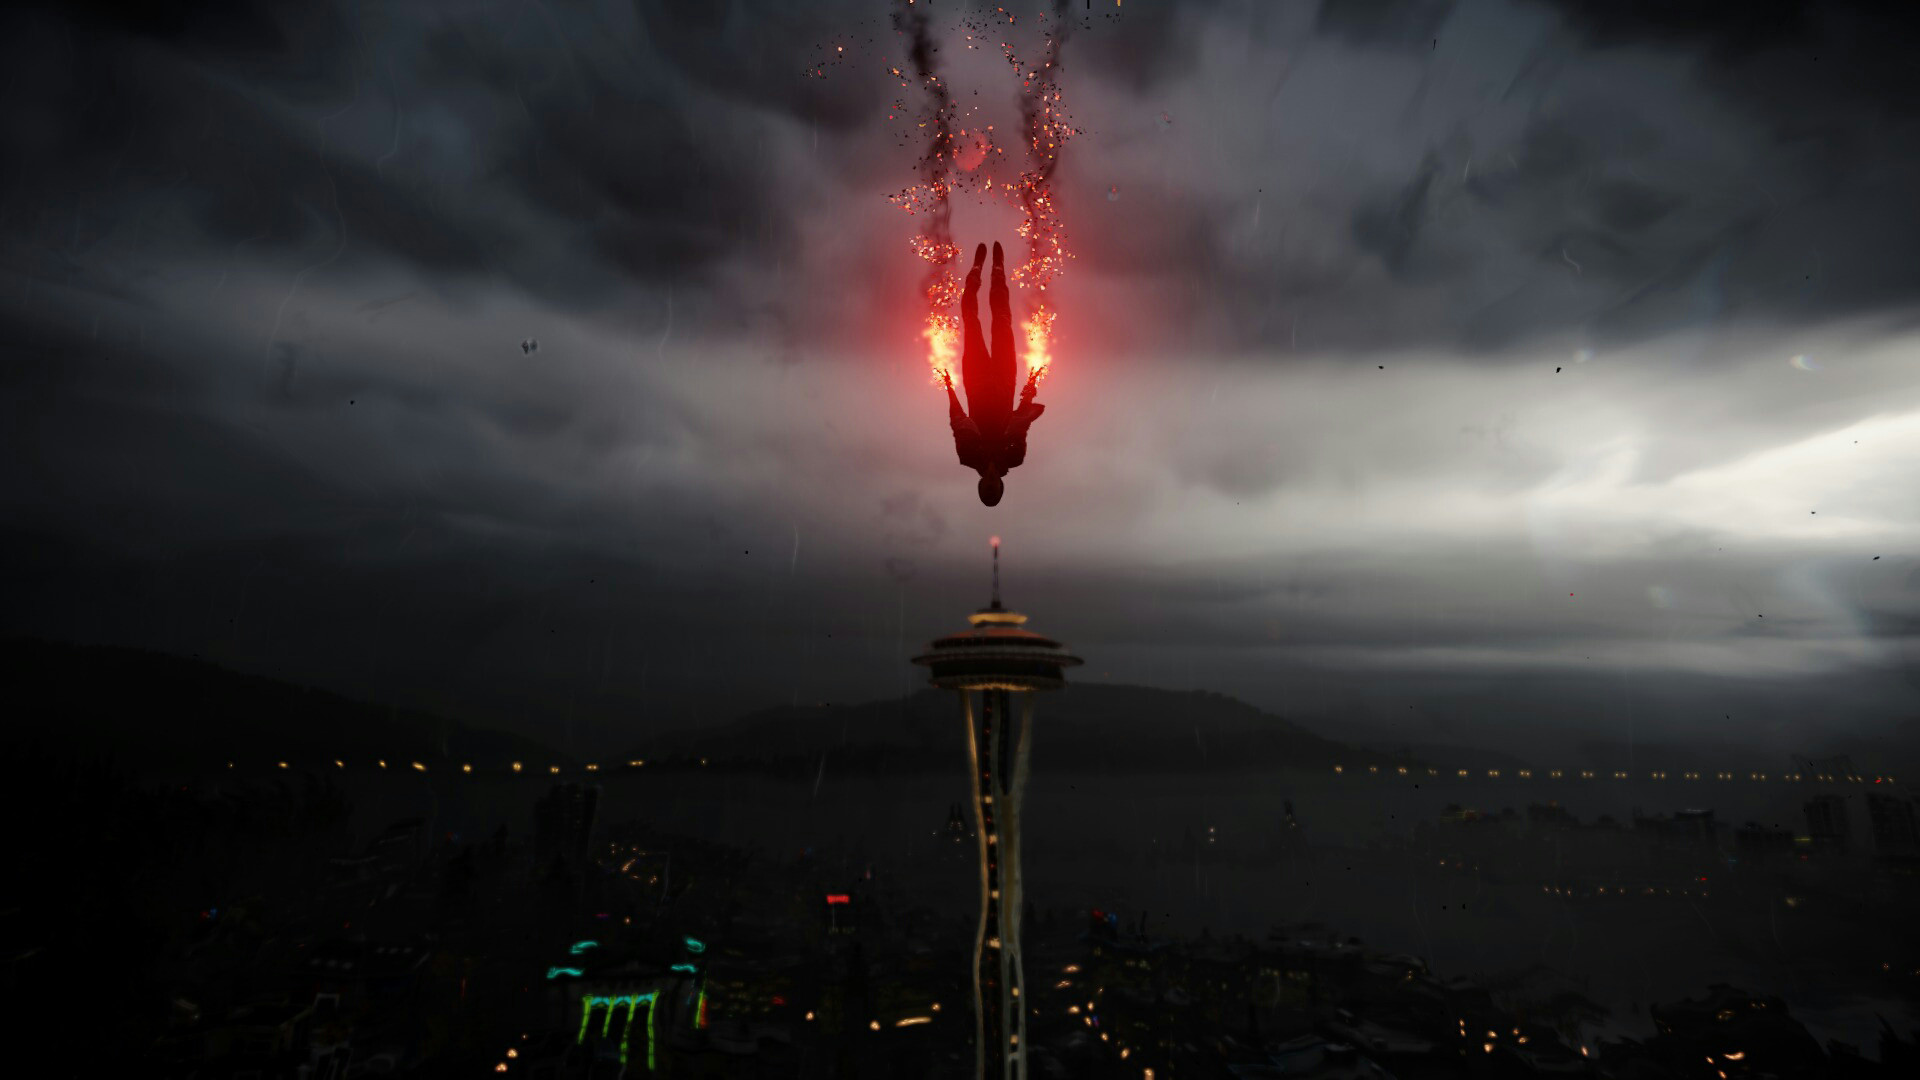 1920x1080 ... Infamous : Second Son Screenshots by Dynamicz34